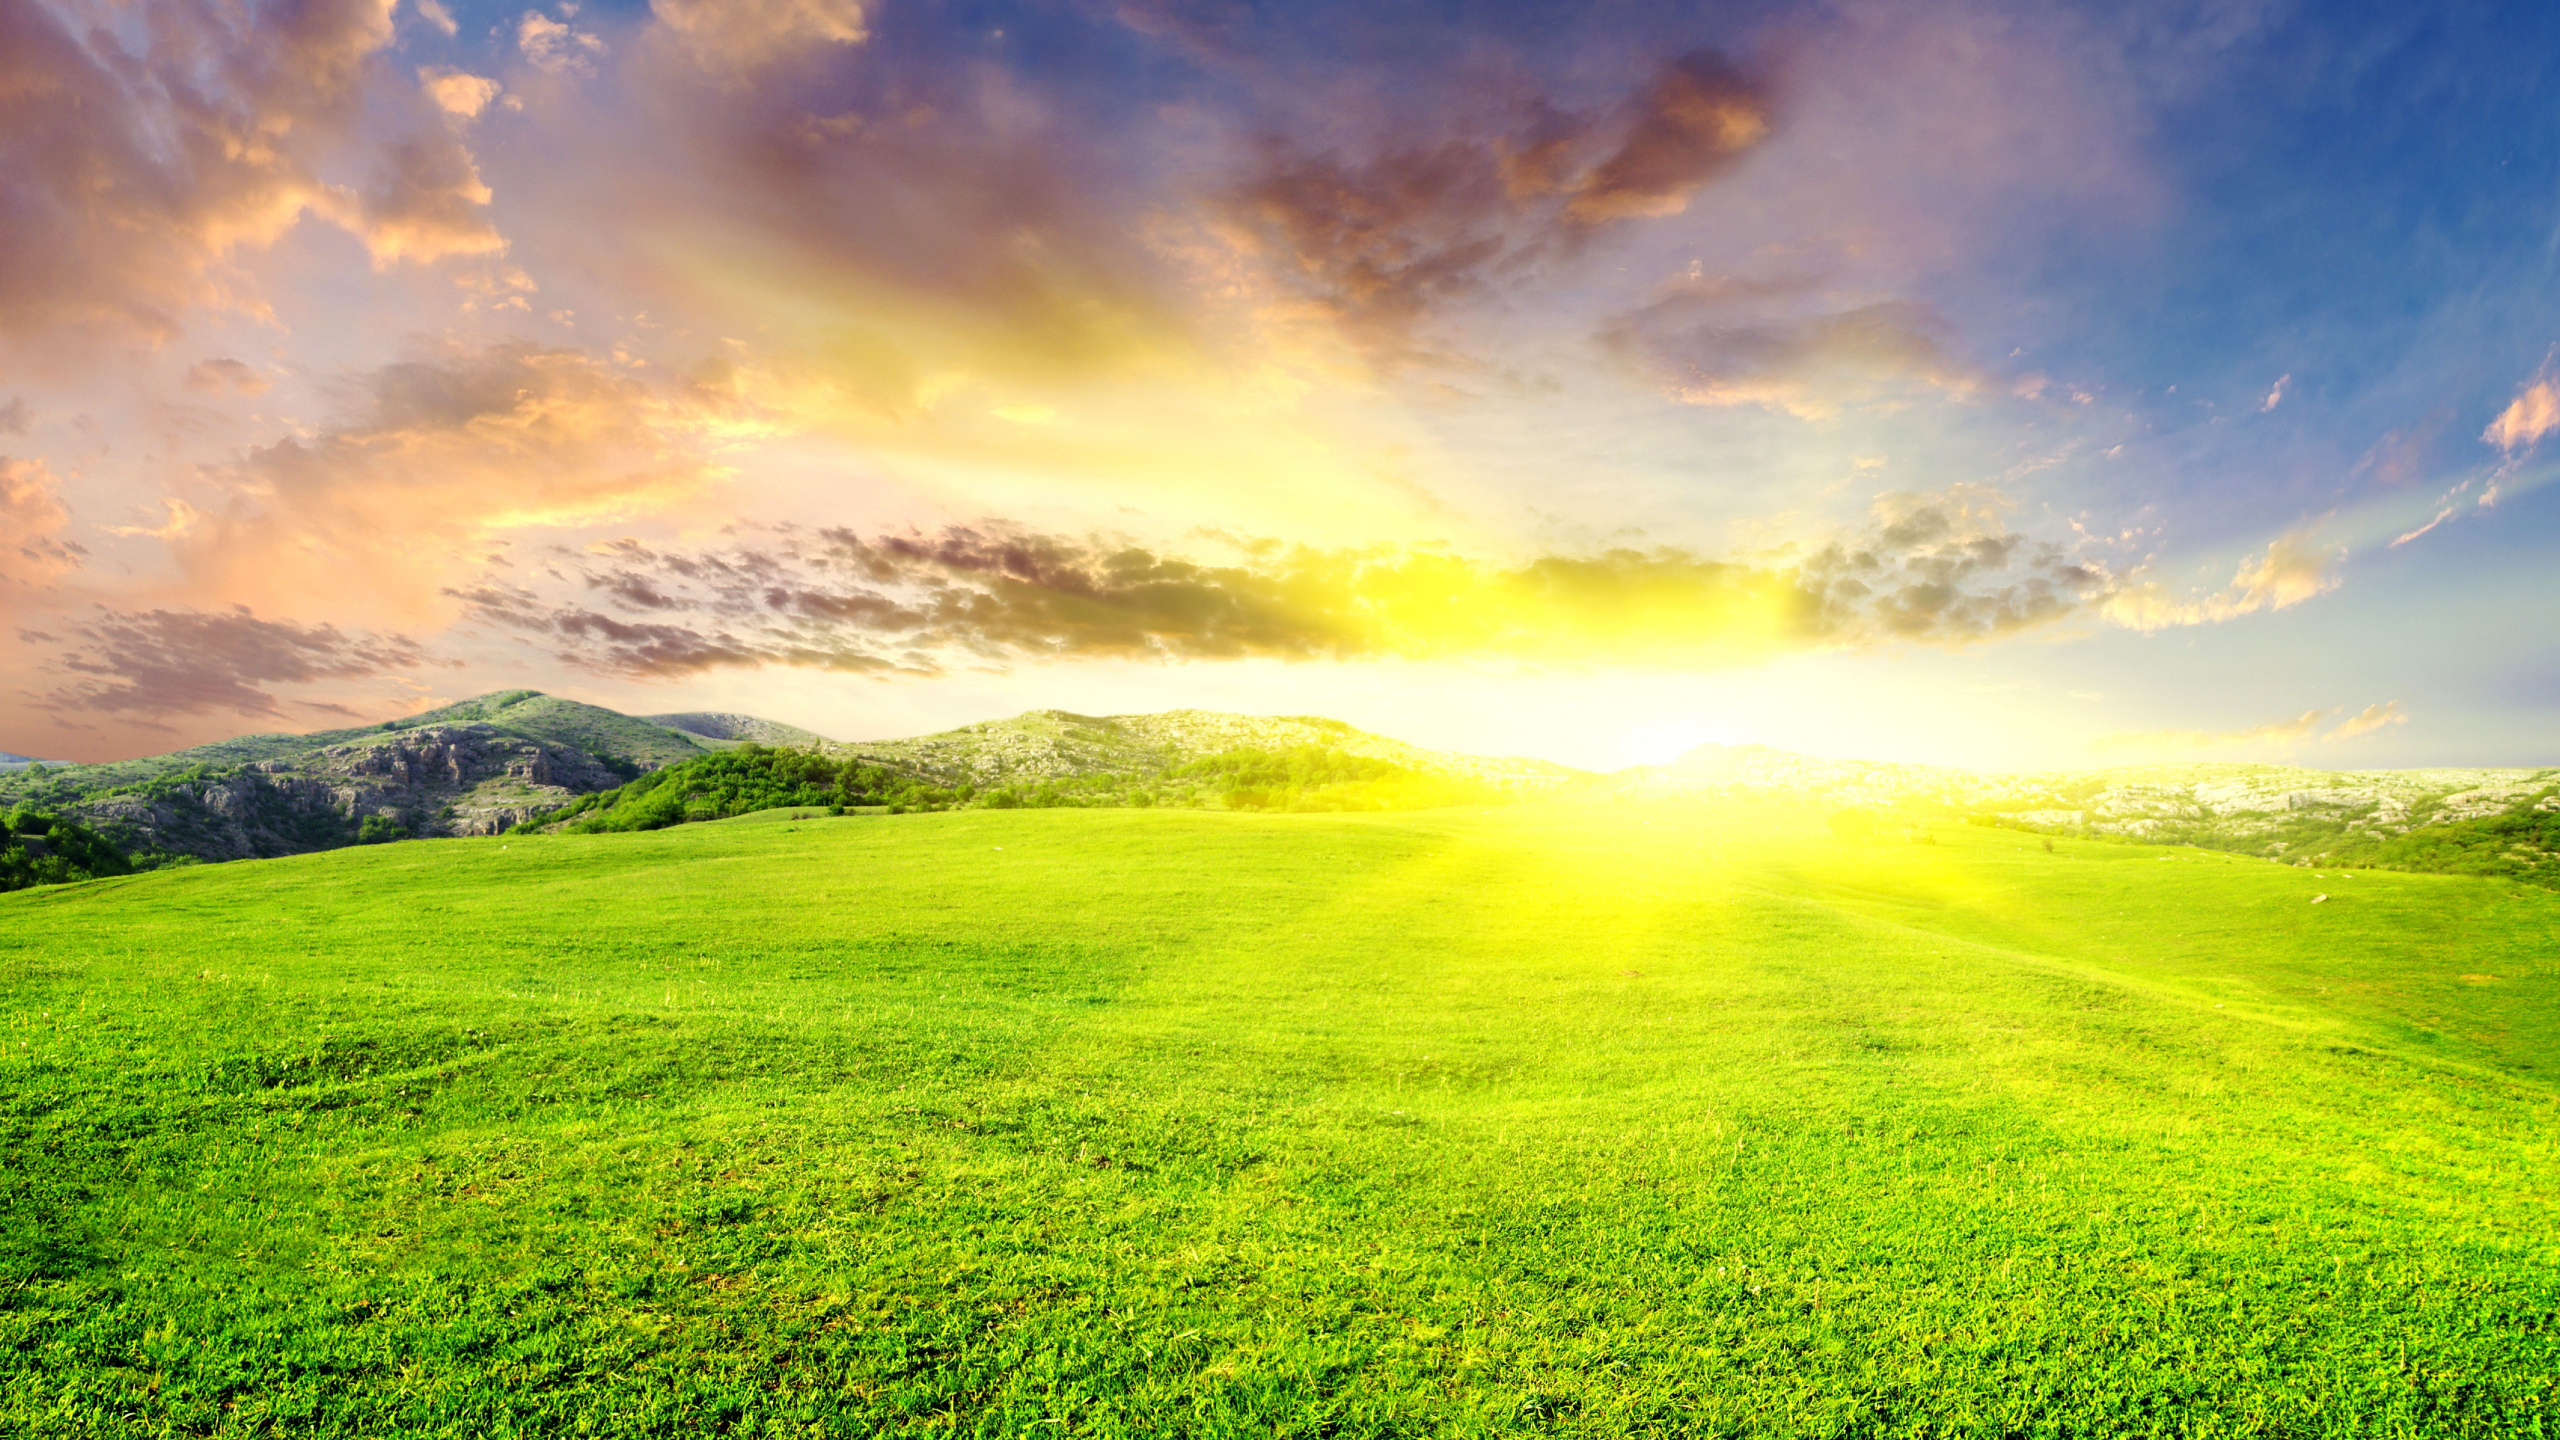 Green Grass Field Under Blue Sky and White Clouds During Daytime. Wallpaper in 2560x1440 Resolution